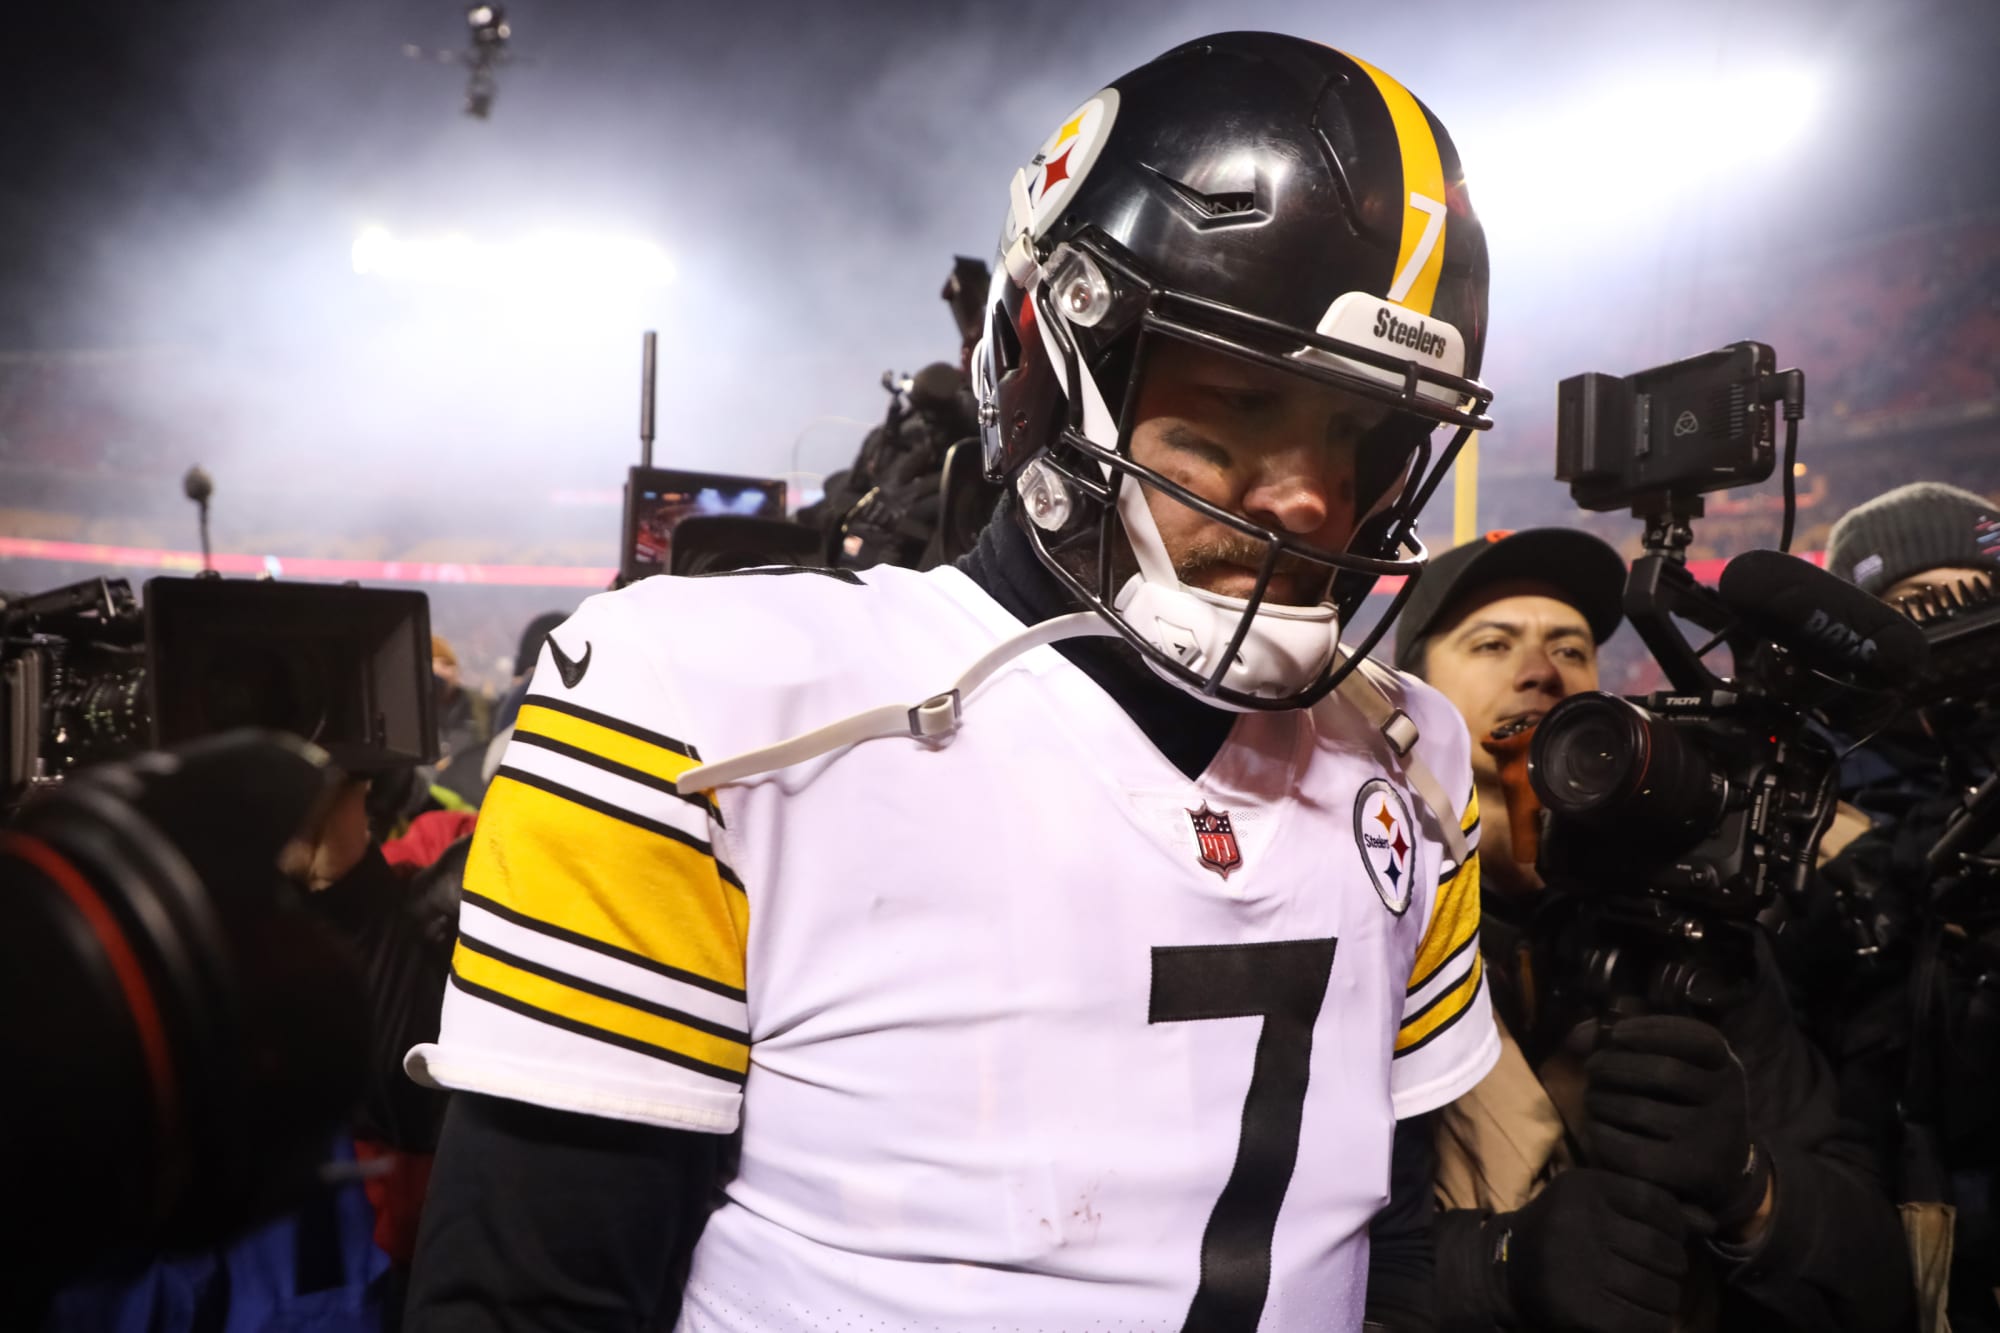 ben-roethlisberger-says-steelers-wanted-to-move-on-he-can-still-play